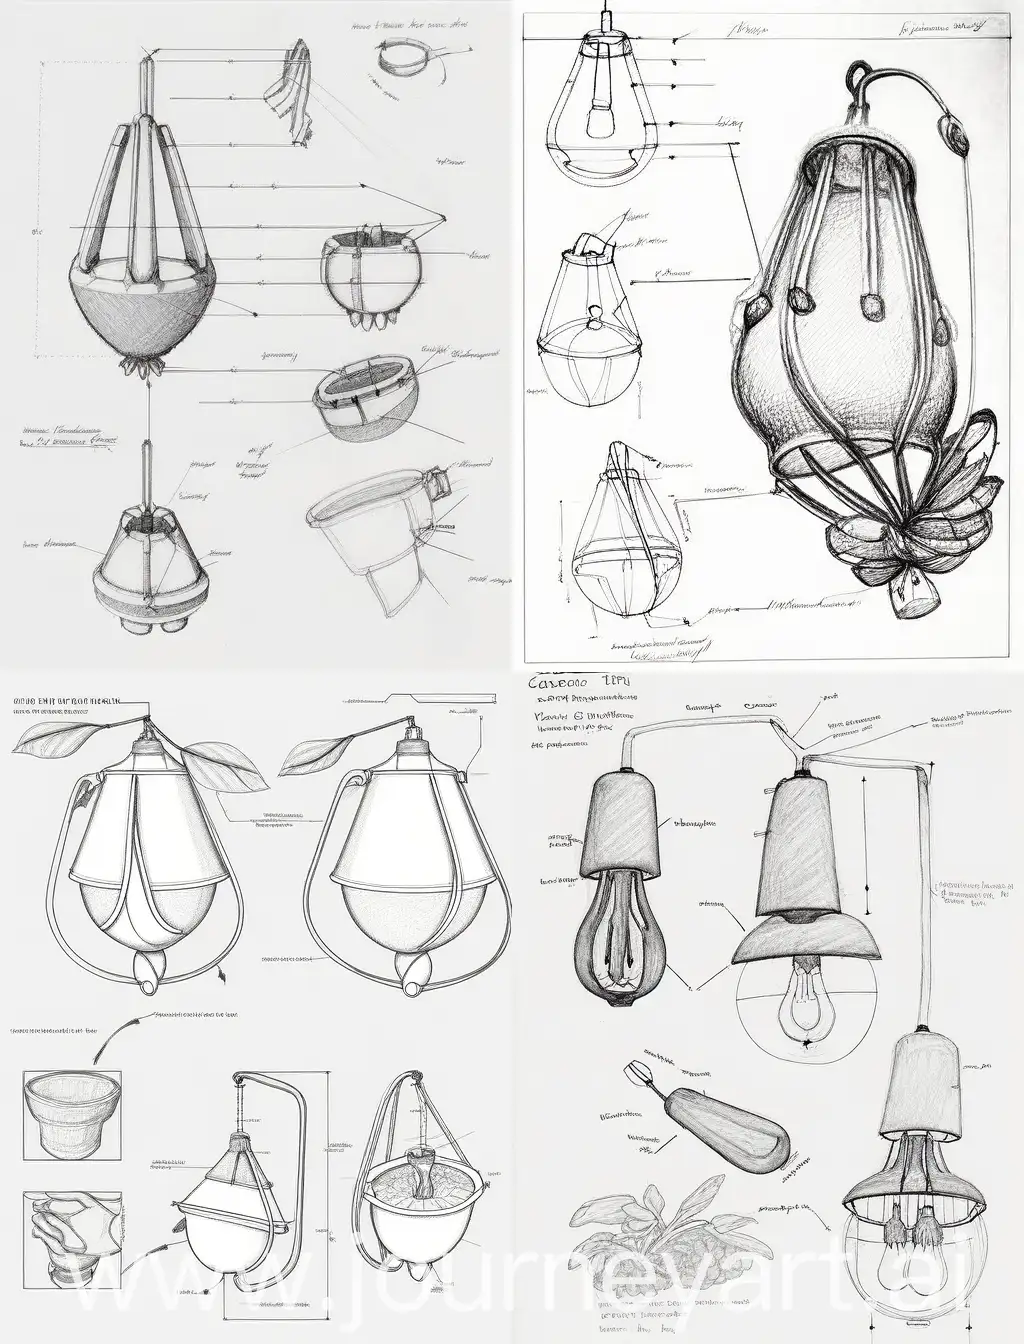 Hand-drawn product design, lighting design, extract avocado shape, craft lines, simplicity, line extraction, Tumbler lighting design sketch scheme hand-drawn
Bionic its texture bionic modeling deductive change process, modeling source, modeling change, refinement, summary process, how to draw lamps, chandeliers, drawing reference, product design sketch, white background, front view, side view, rear view, wire frame, sketch from different angles, pencil line manuscript, each program should present form source and intent, and form change deliberation process; And how to reconstruct and evolve primitive body forms. Main view, detail, explosion